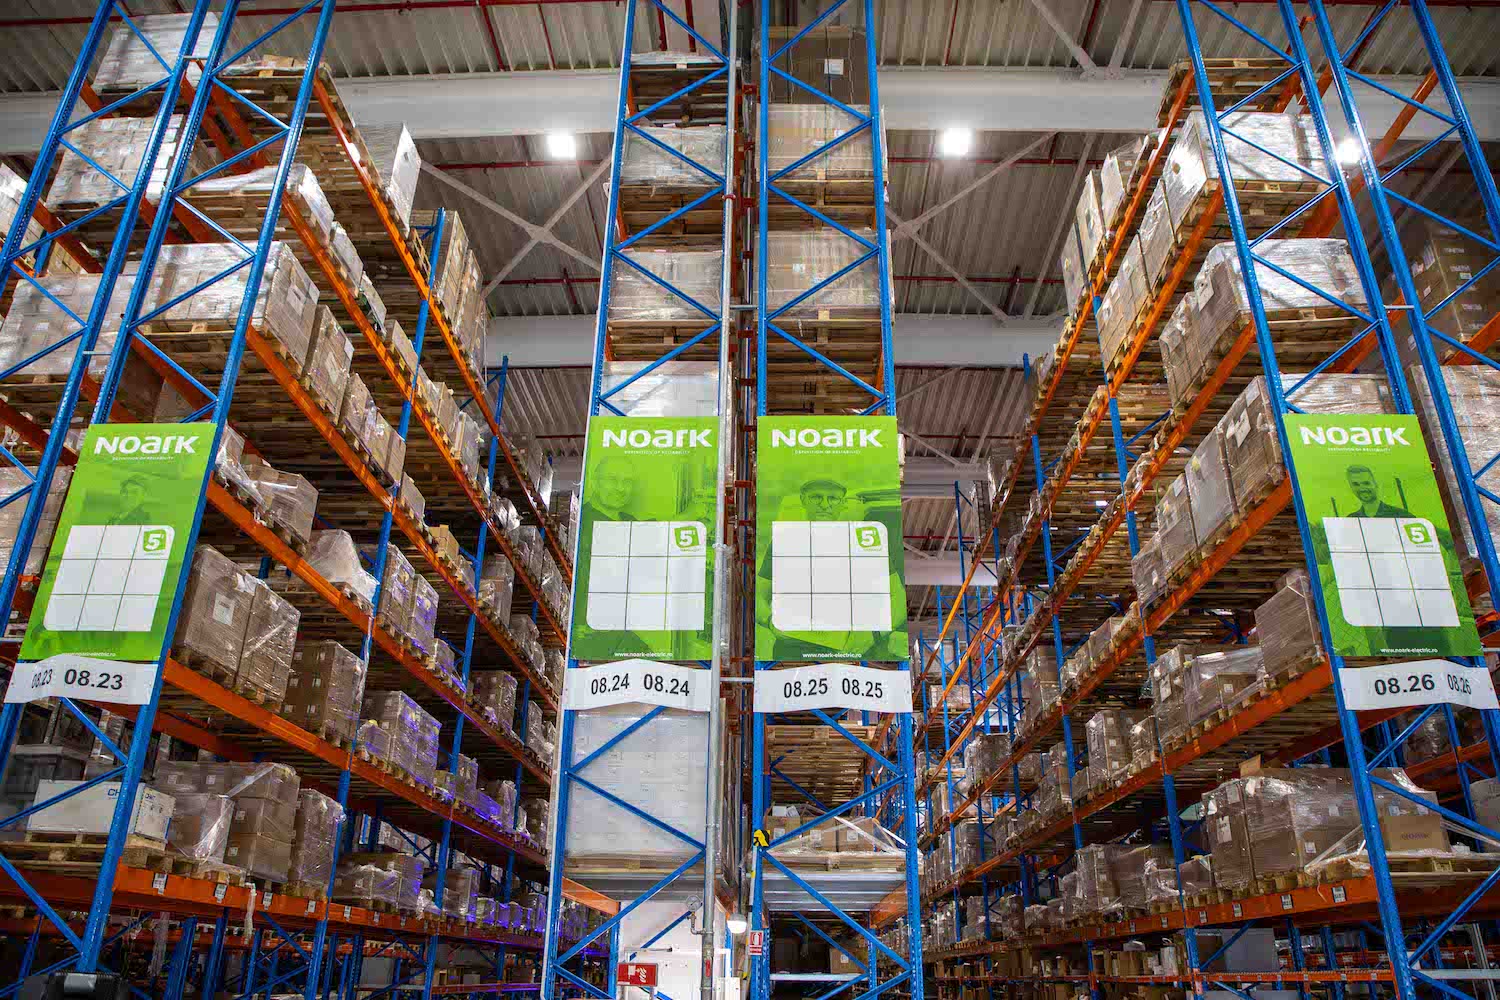 Noark Electric – Romania, the new logistic hub for the region. The company inaugurates a new distribution center near Bucharest